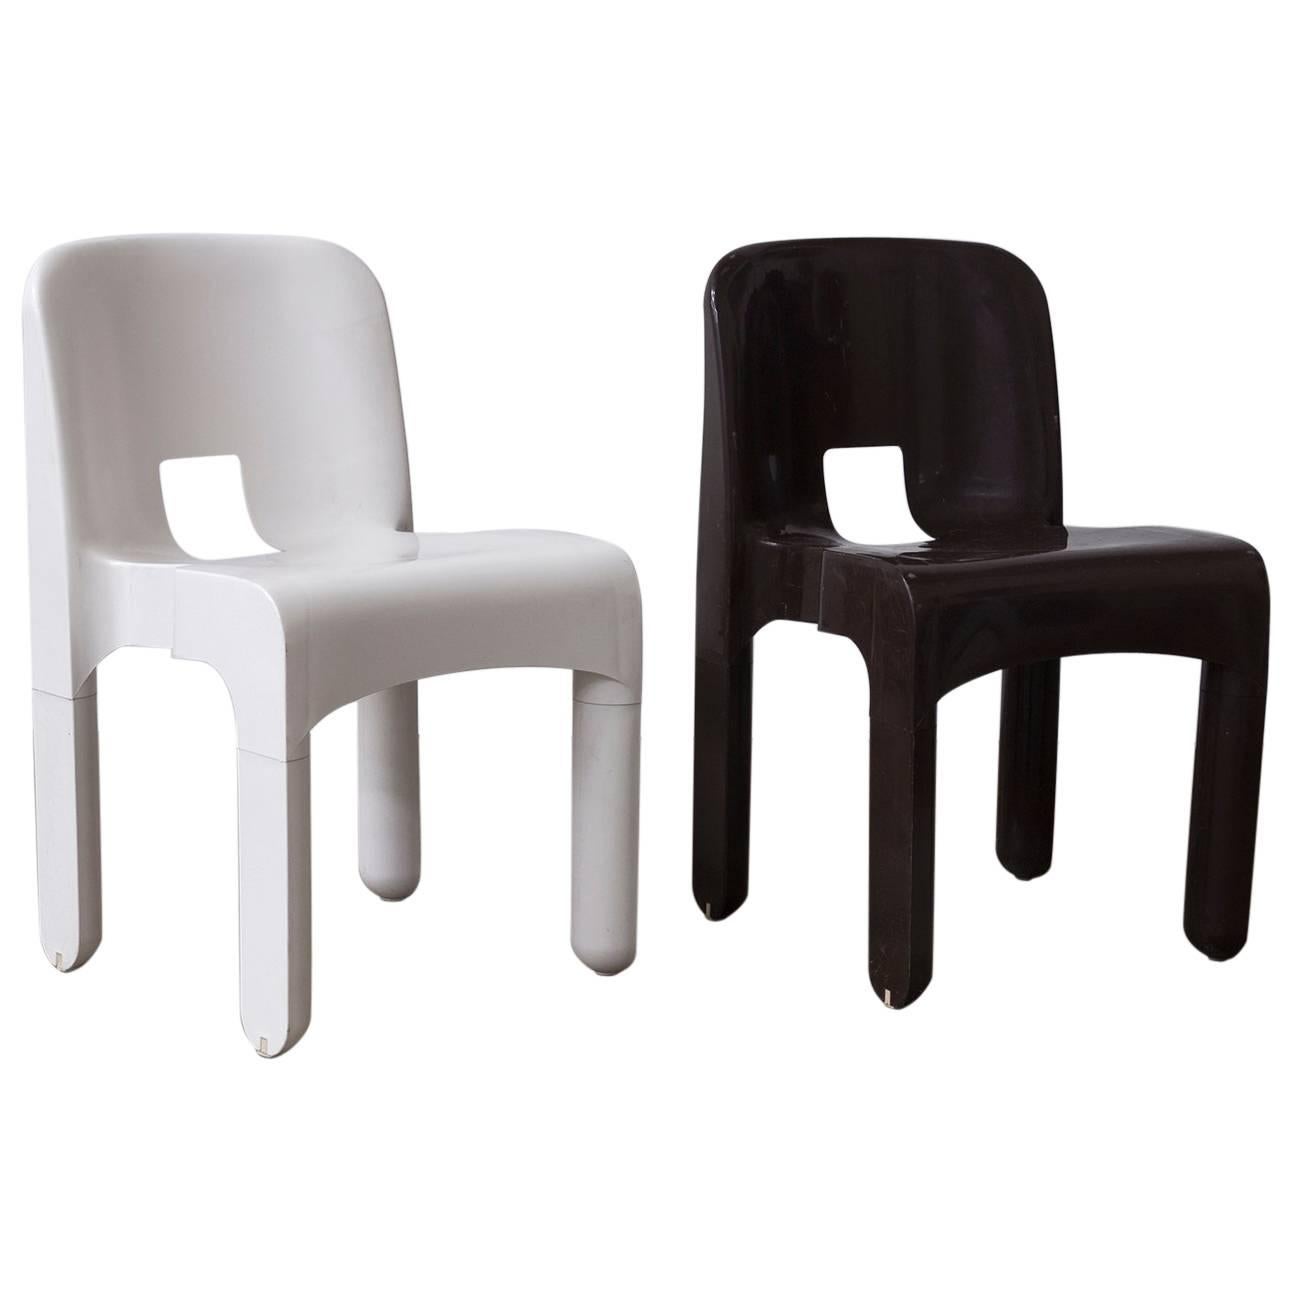 1967 Joe Colombo, Universale Plastic Chair, Type 4867 in Chocolate Brown & White